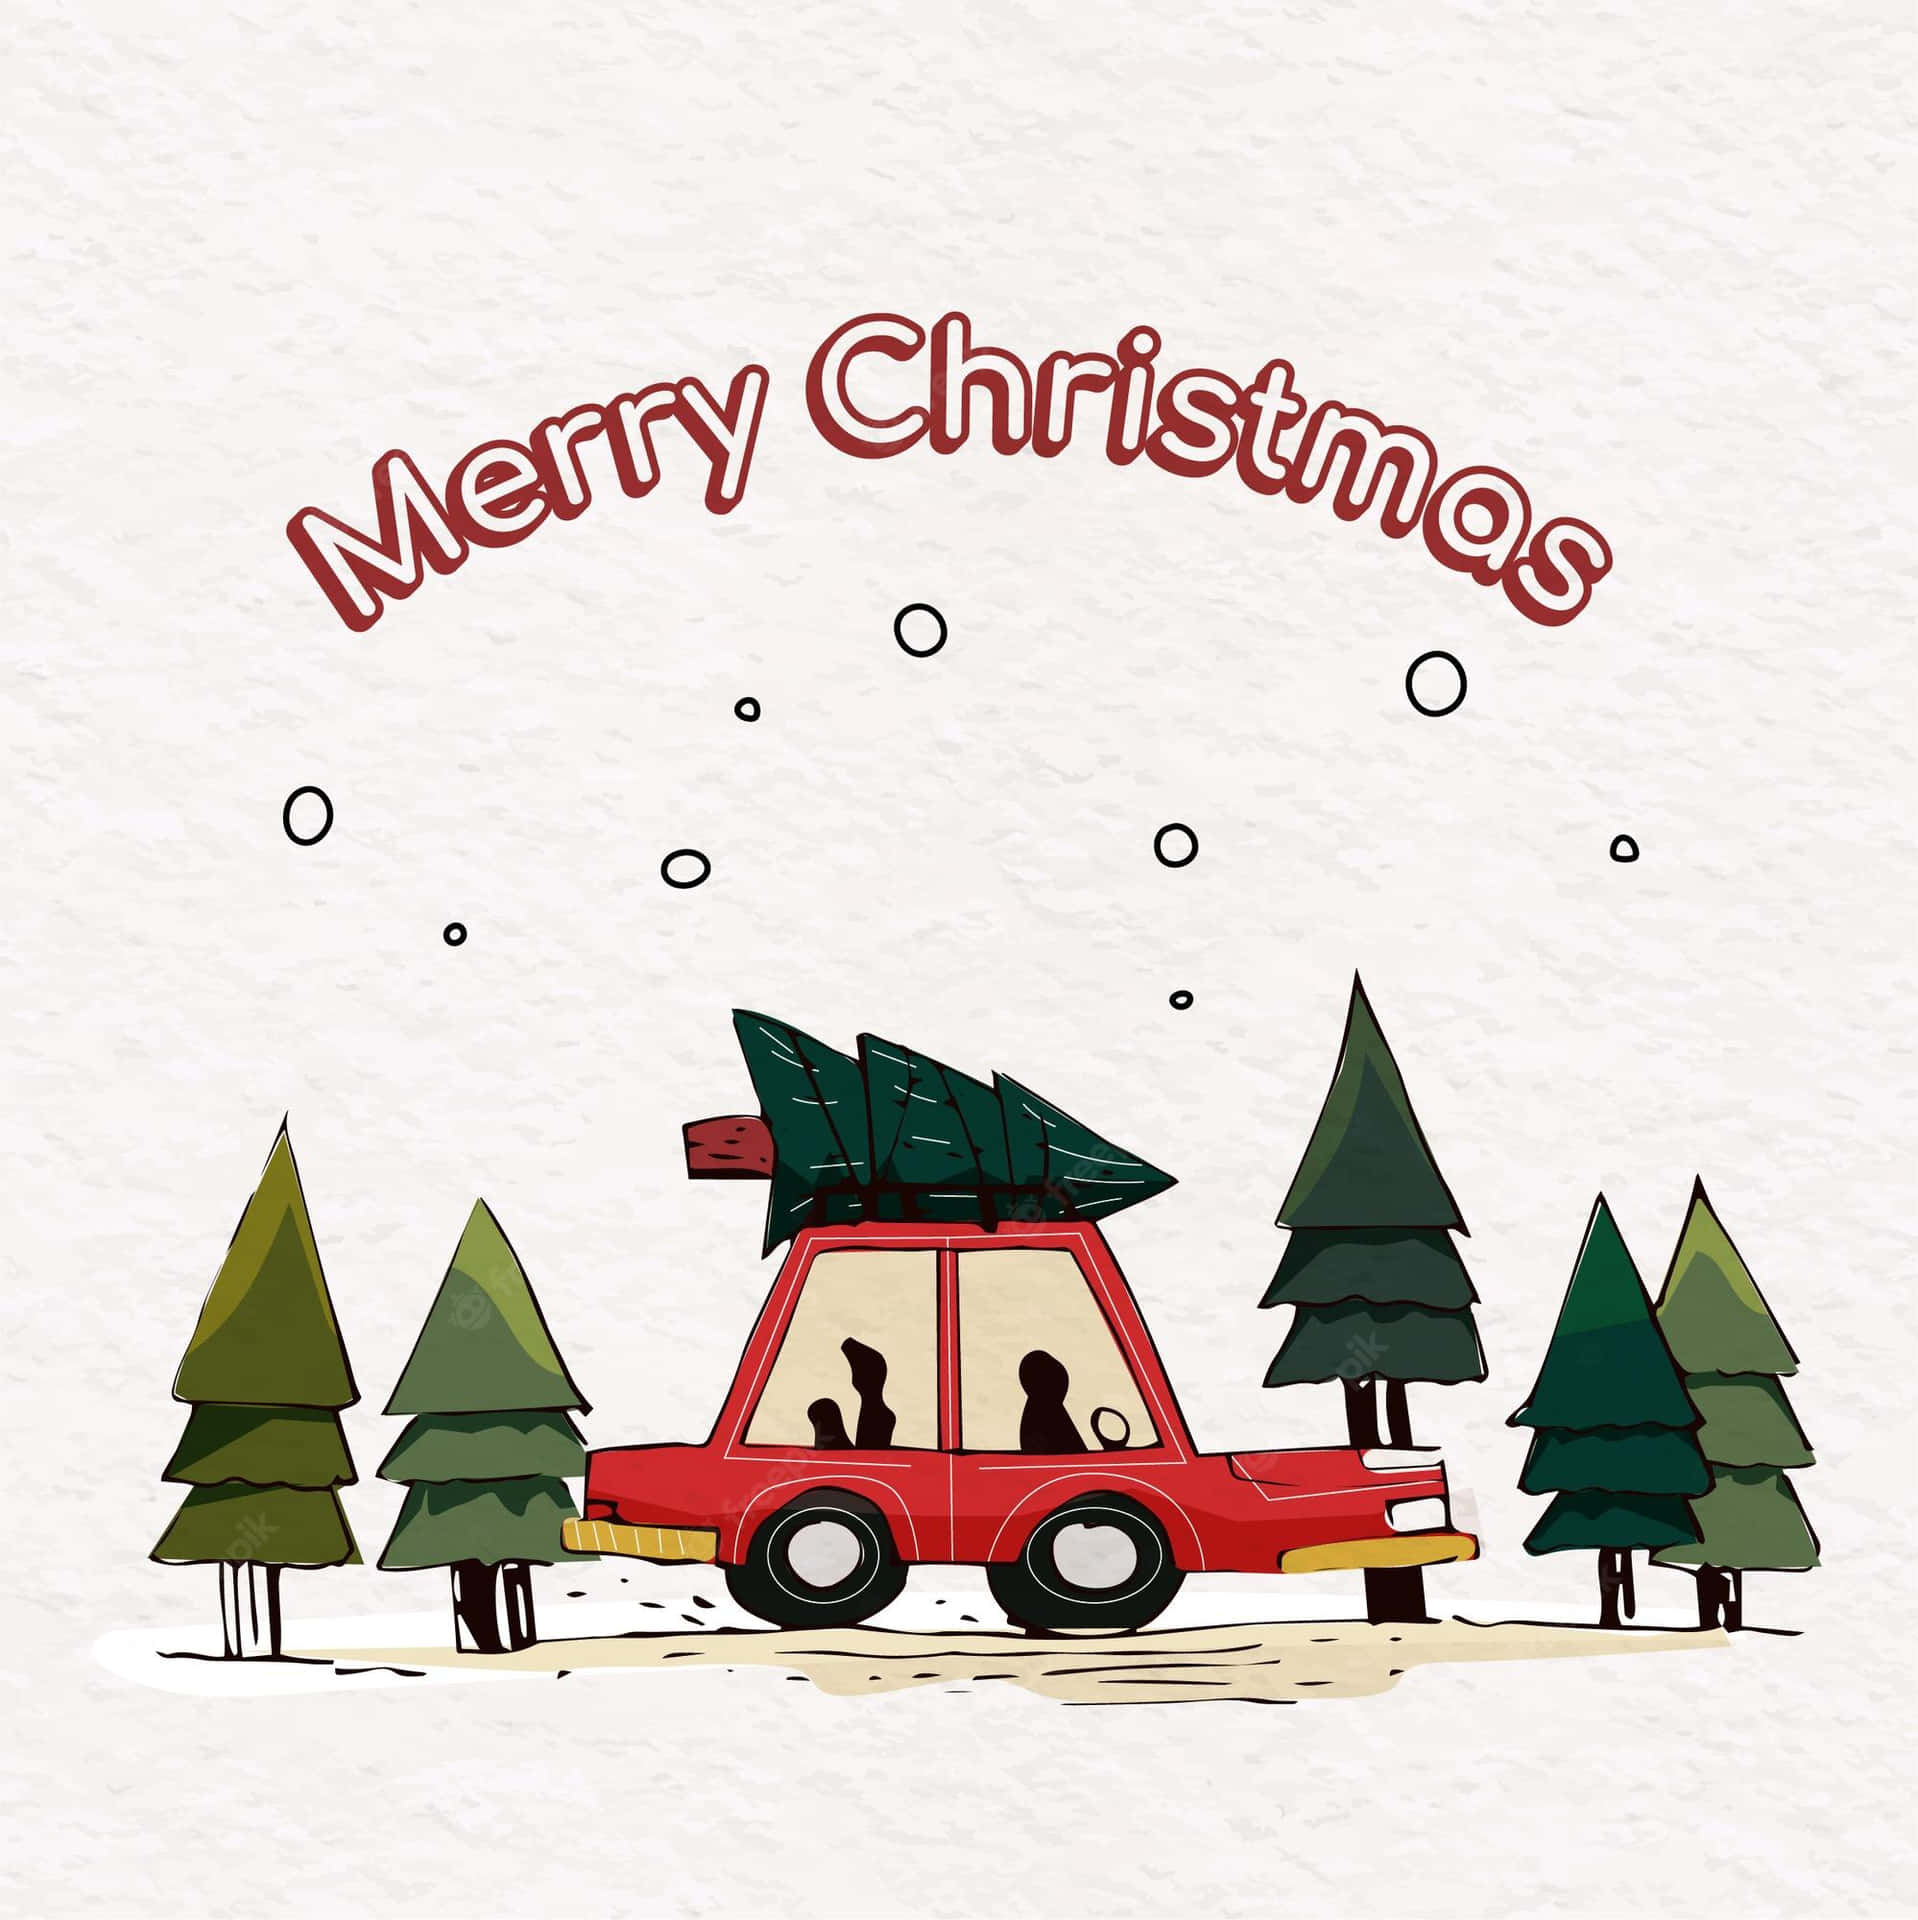 Merry Christmas Card With Car And Trees Wallpaper